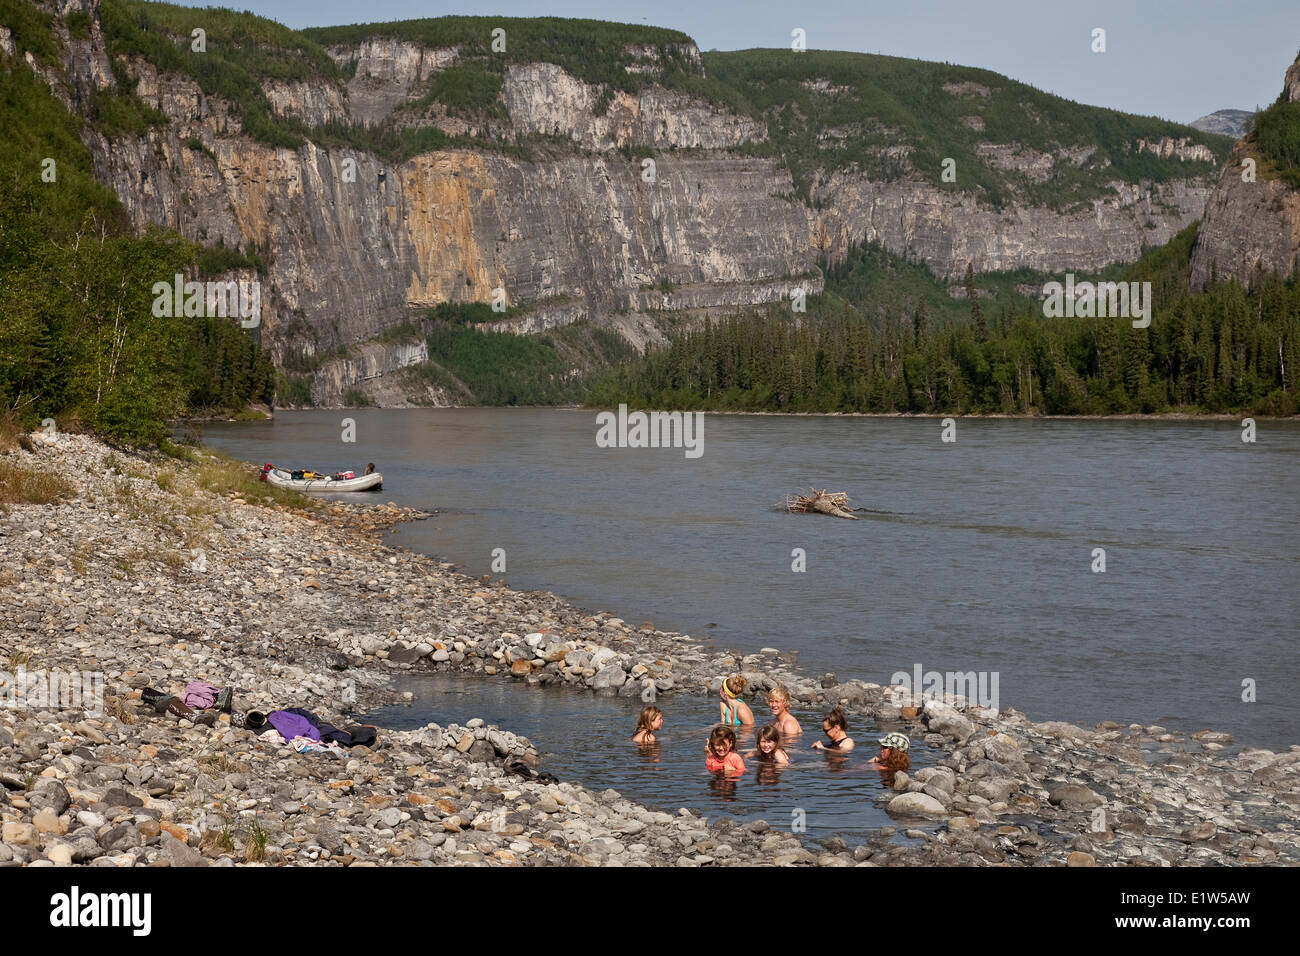 Group of people enjoy hot spring on Nahanni River, Nahanni National Park Preserve, NWT, Canada. Stock Photo